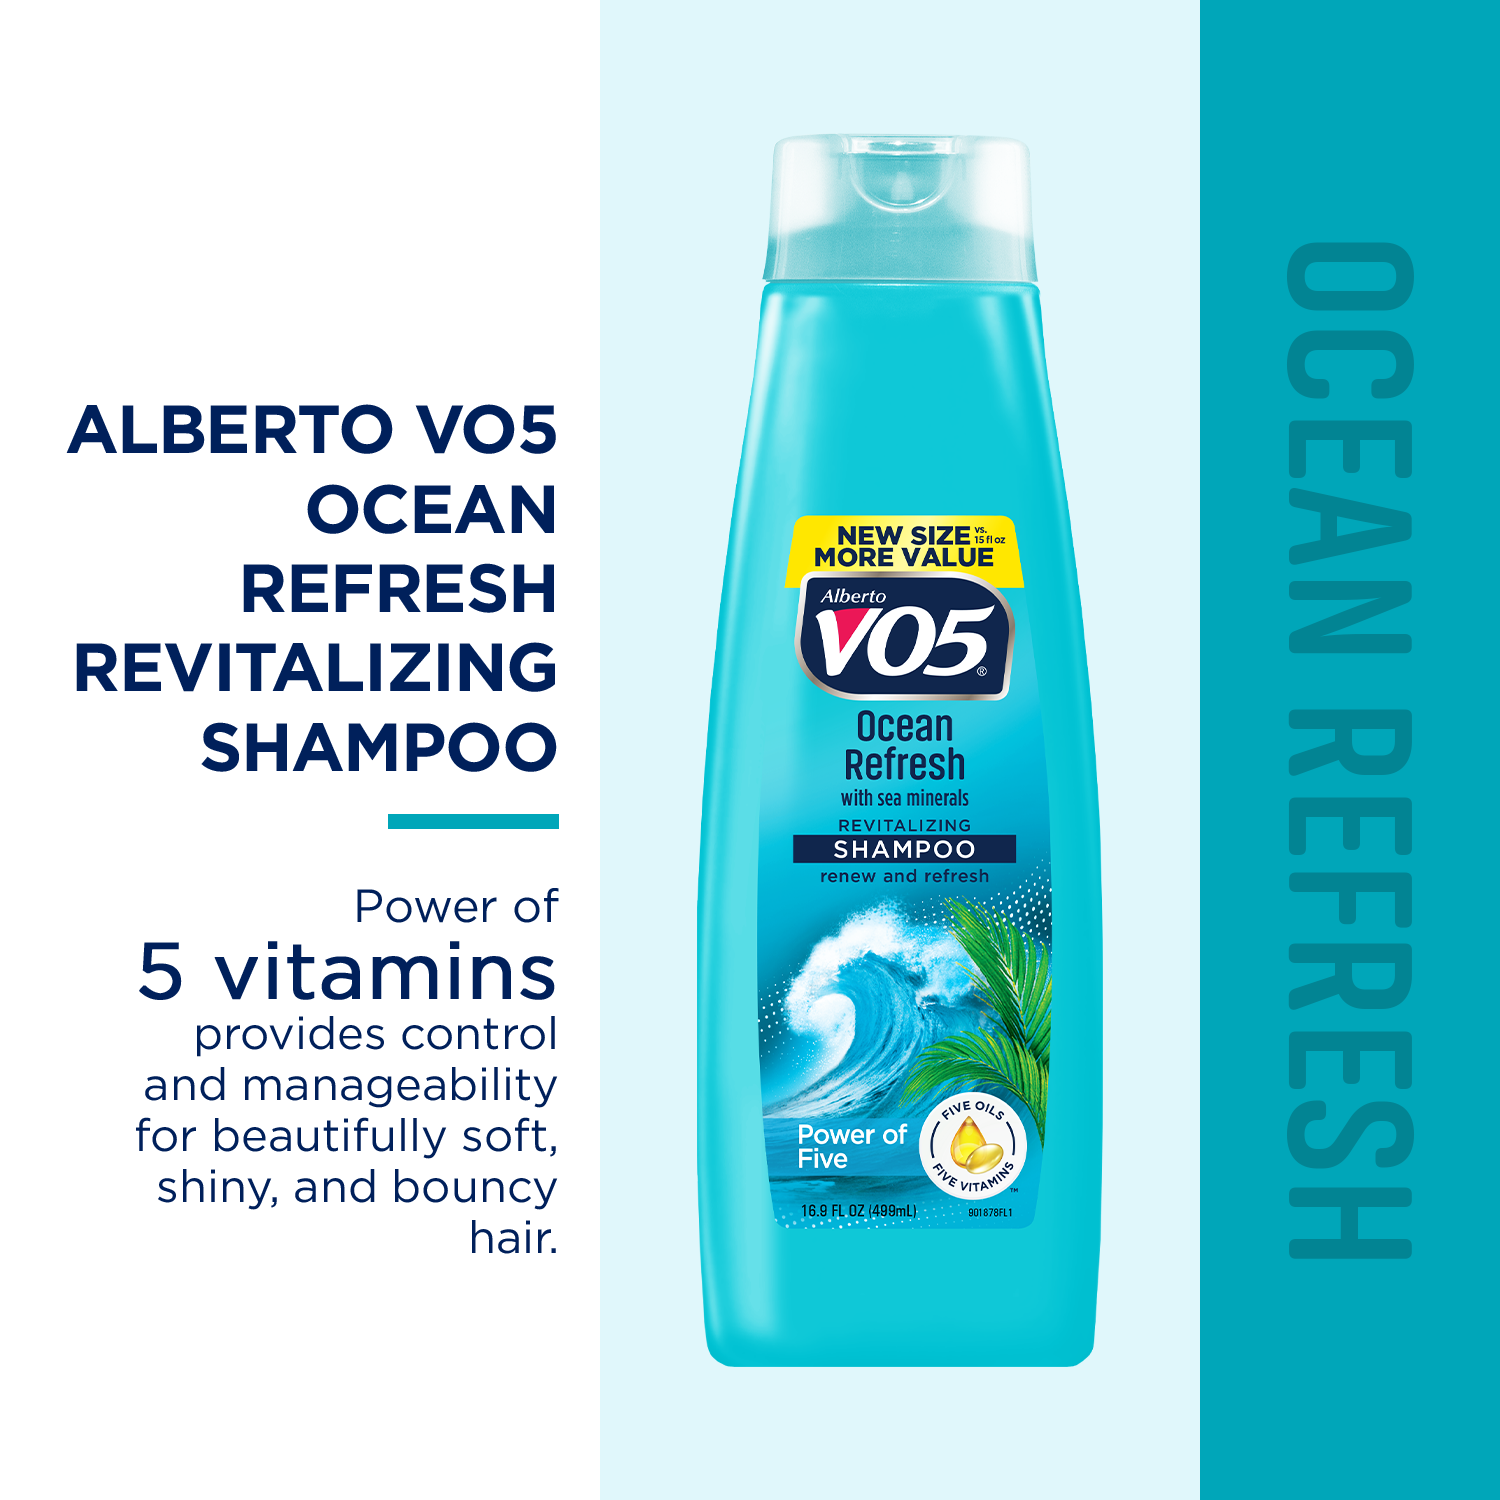 Alberto VO5 Ocean Refresh Revitalizing Shampoo with Sea Minerals, for All Hair Types, 16.9 oz - image 3 of 6